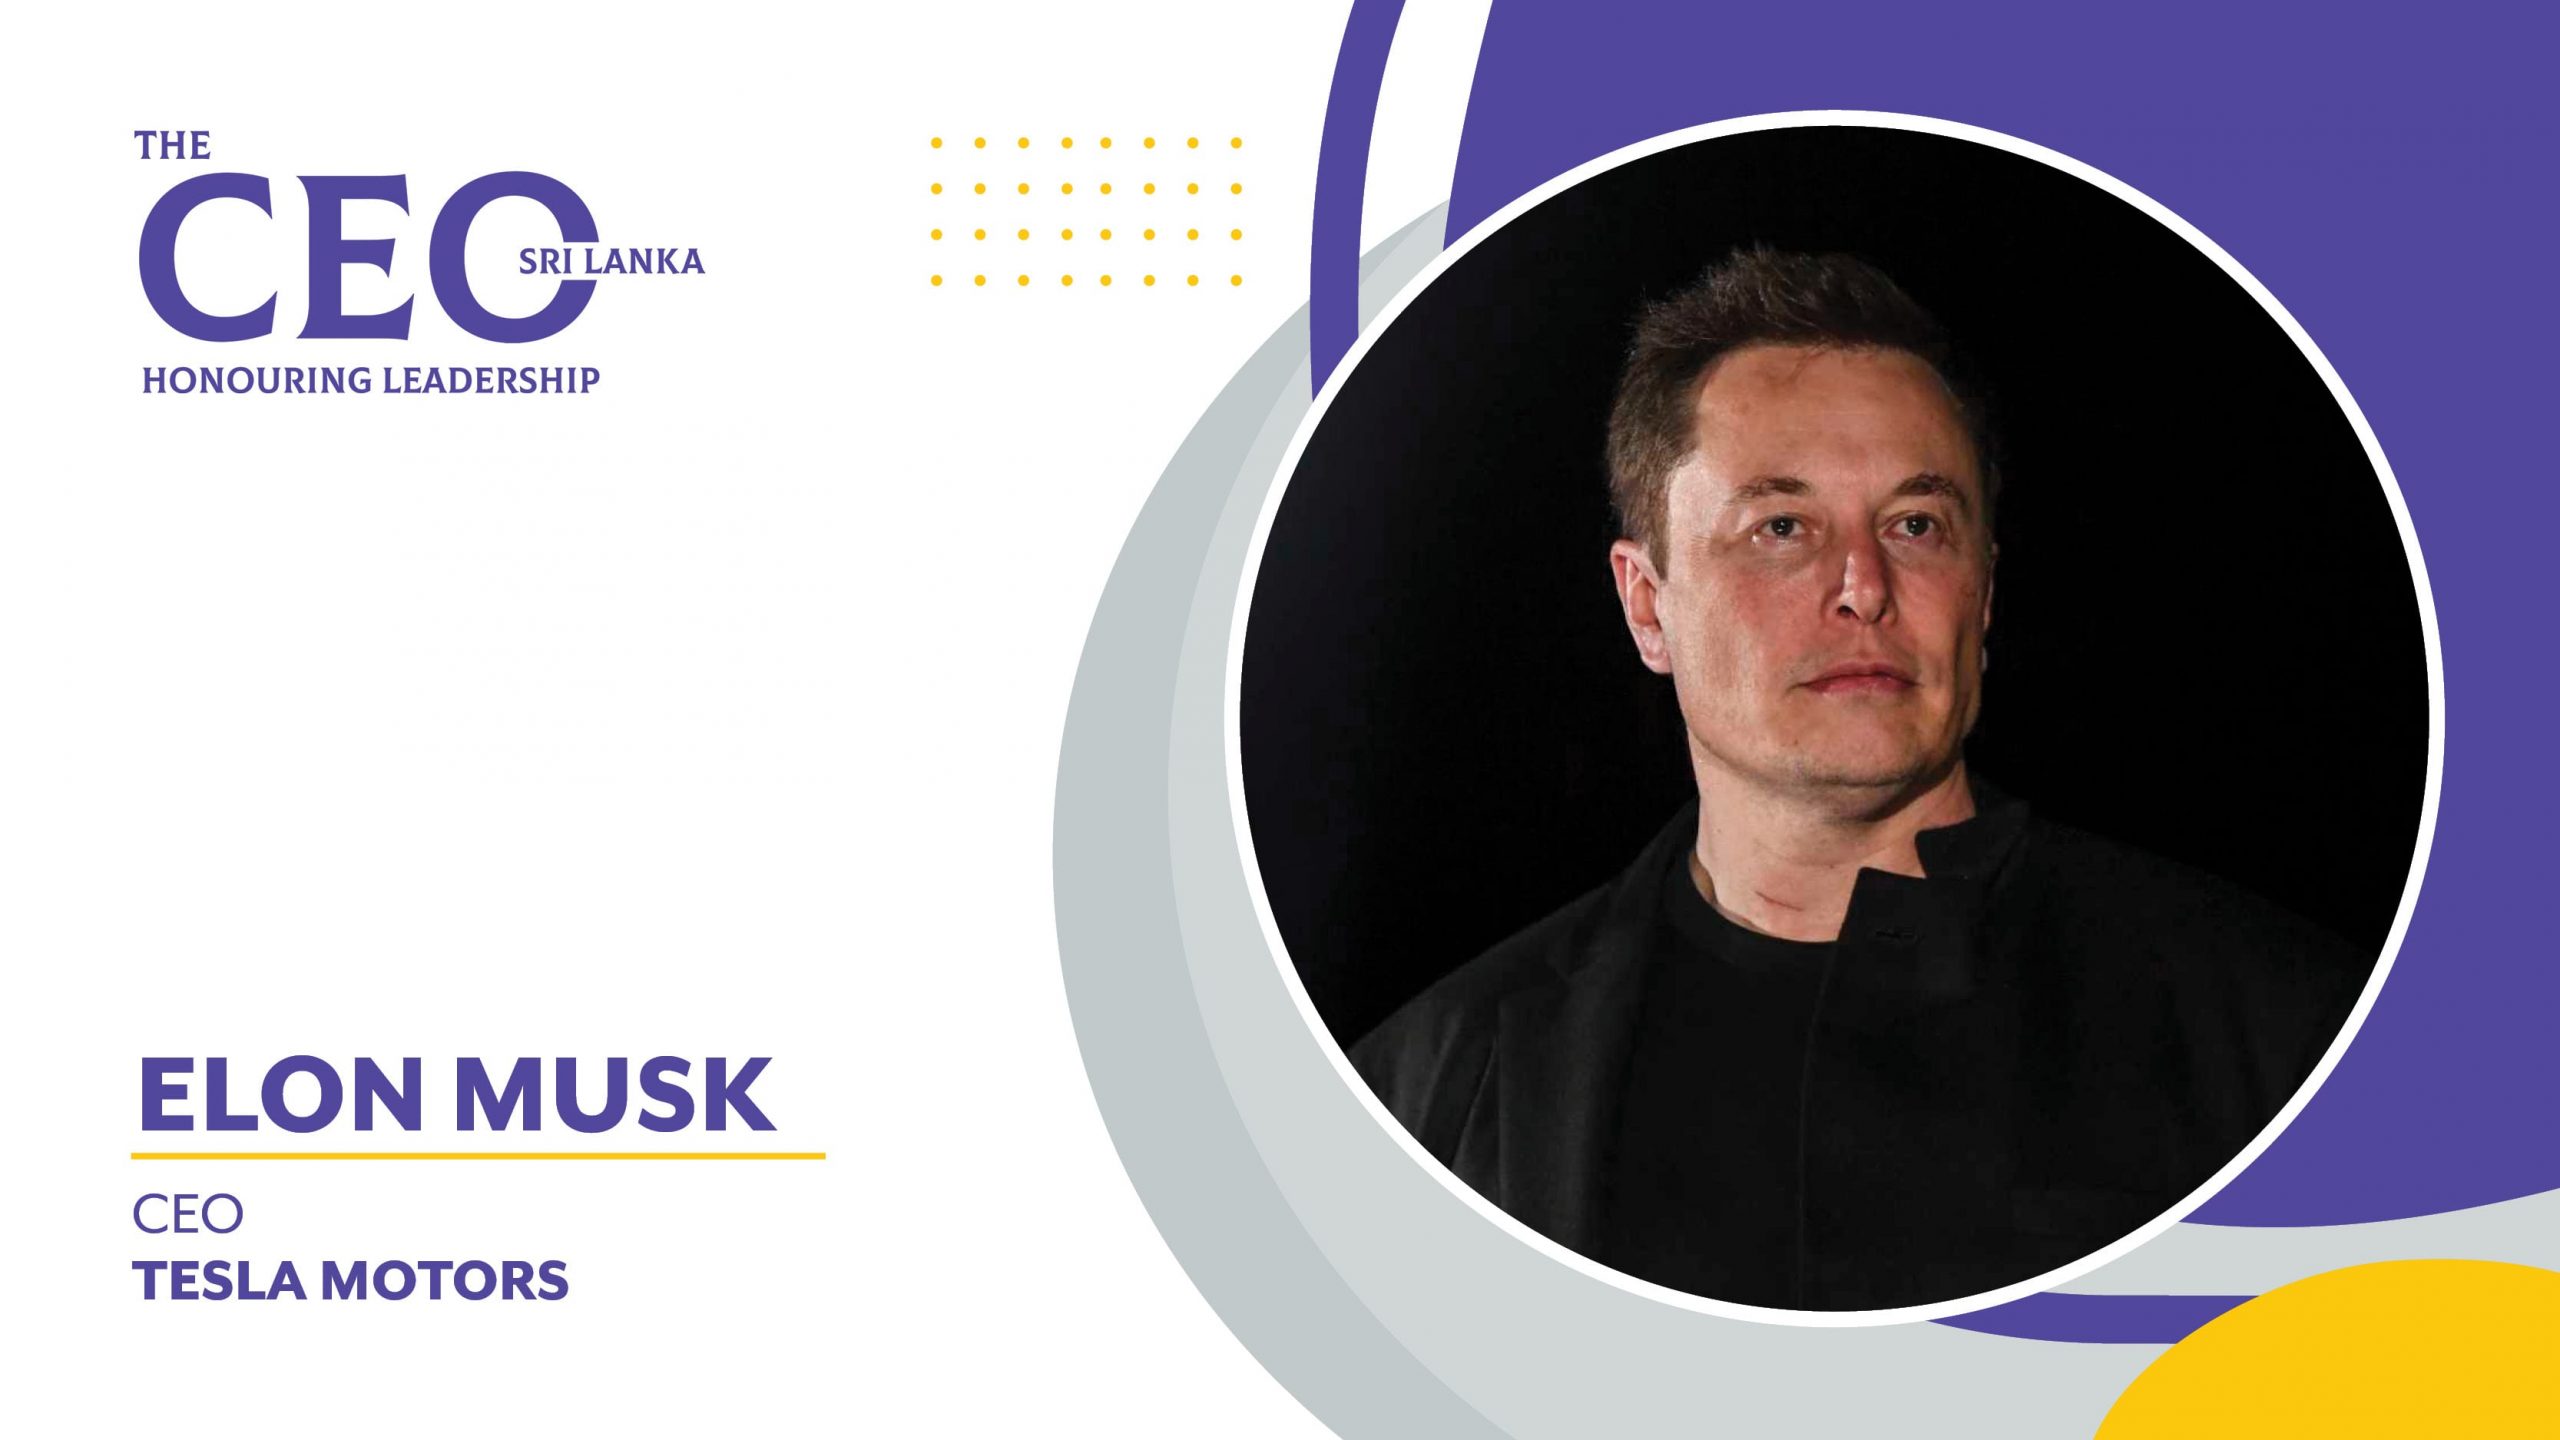 What Are the True Intentions of The Great Elon Musk? Why Don’t We See Eye-To-Eye with Elon Musk? – CEO Of Tesla Motors, Elon Musk